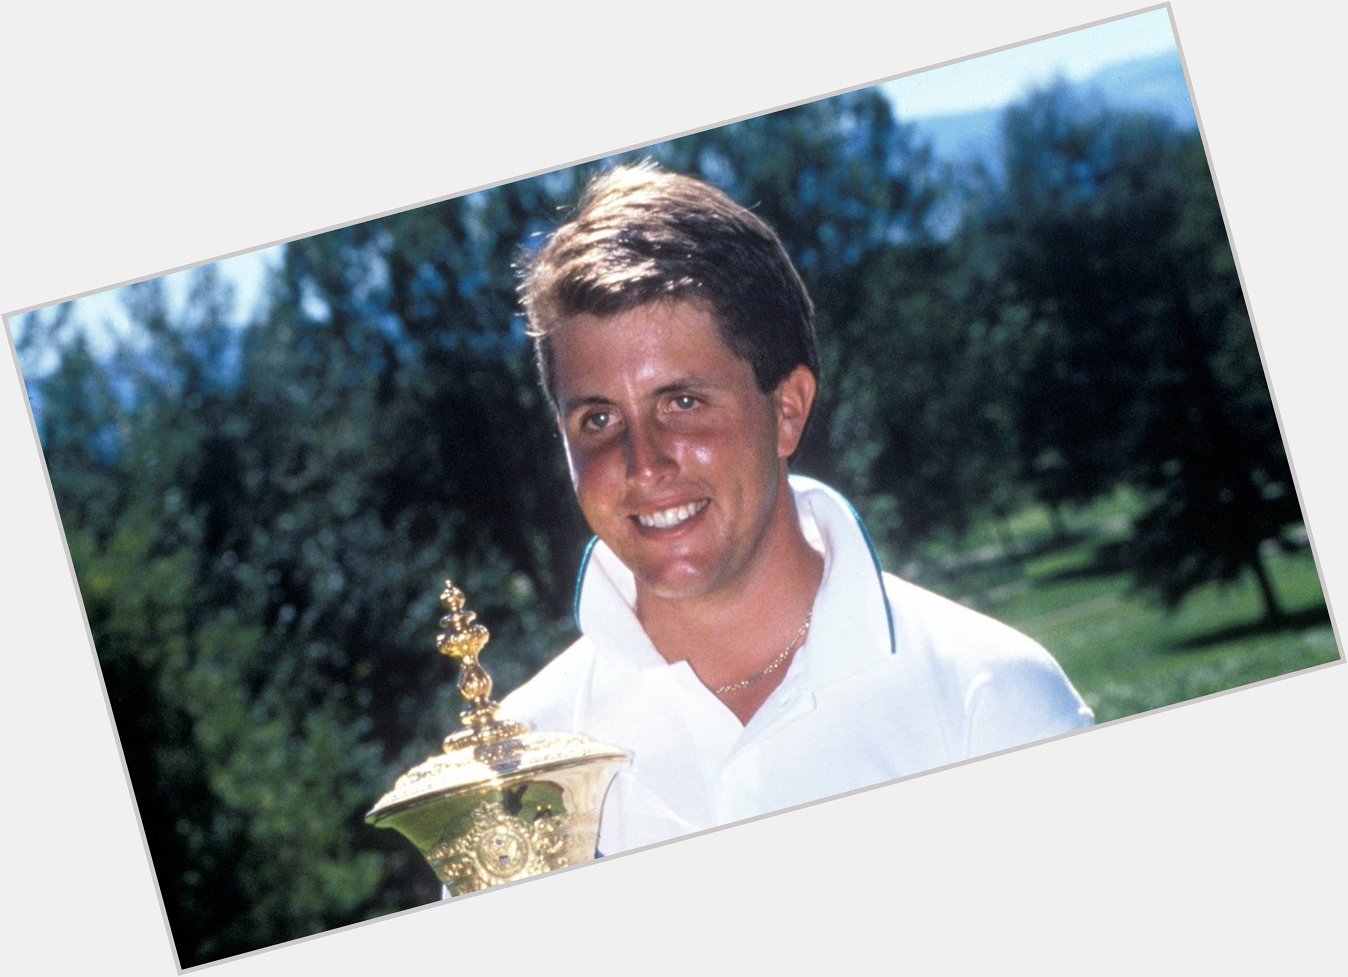 Happy birthday to 1990 champion Phil Mickelson! Hope you\re having a great day, wherever that may be! 